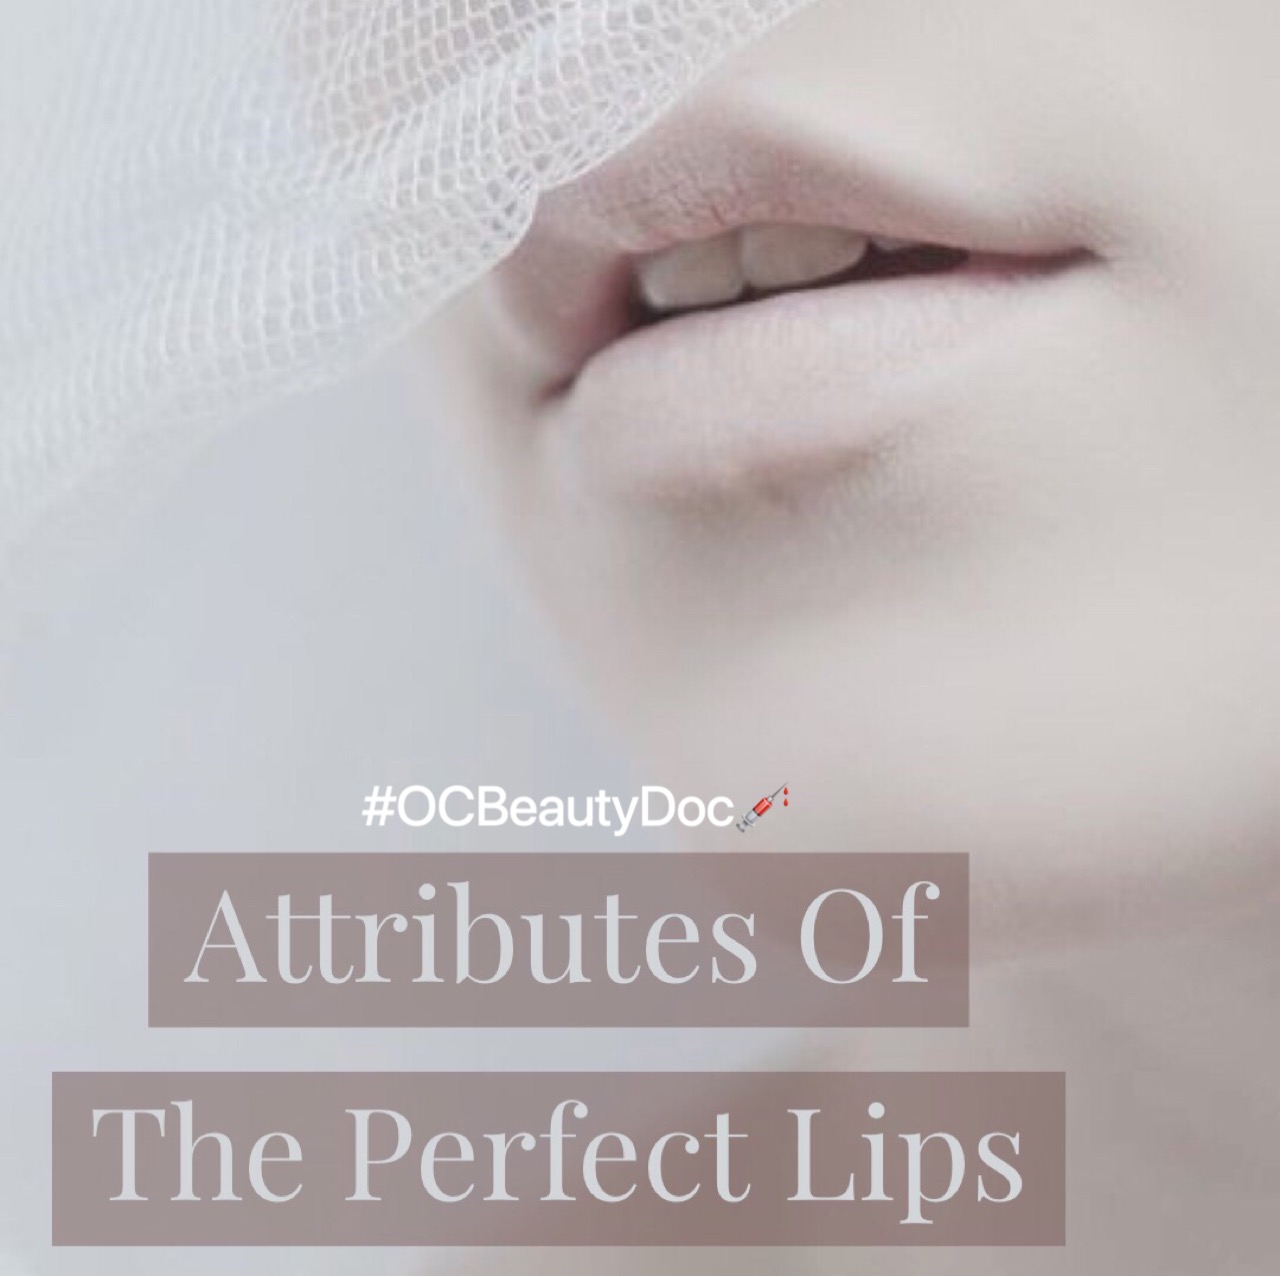 Attributes of the Perfect Lips